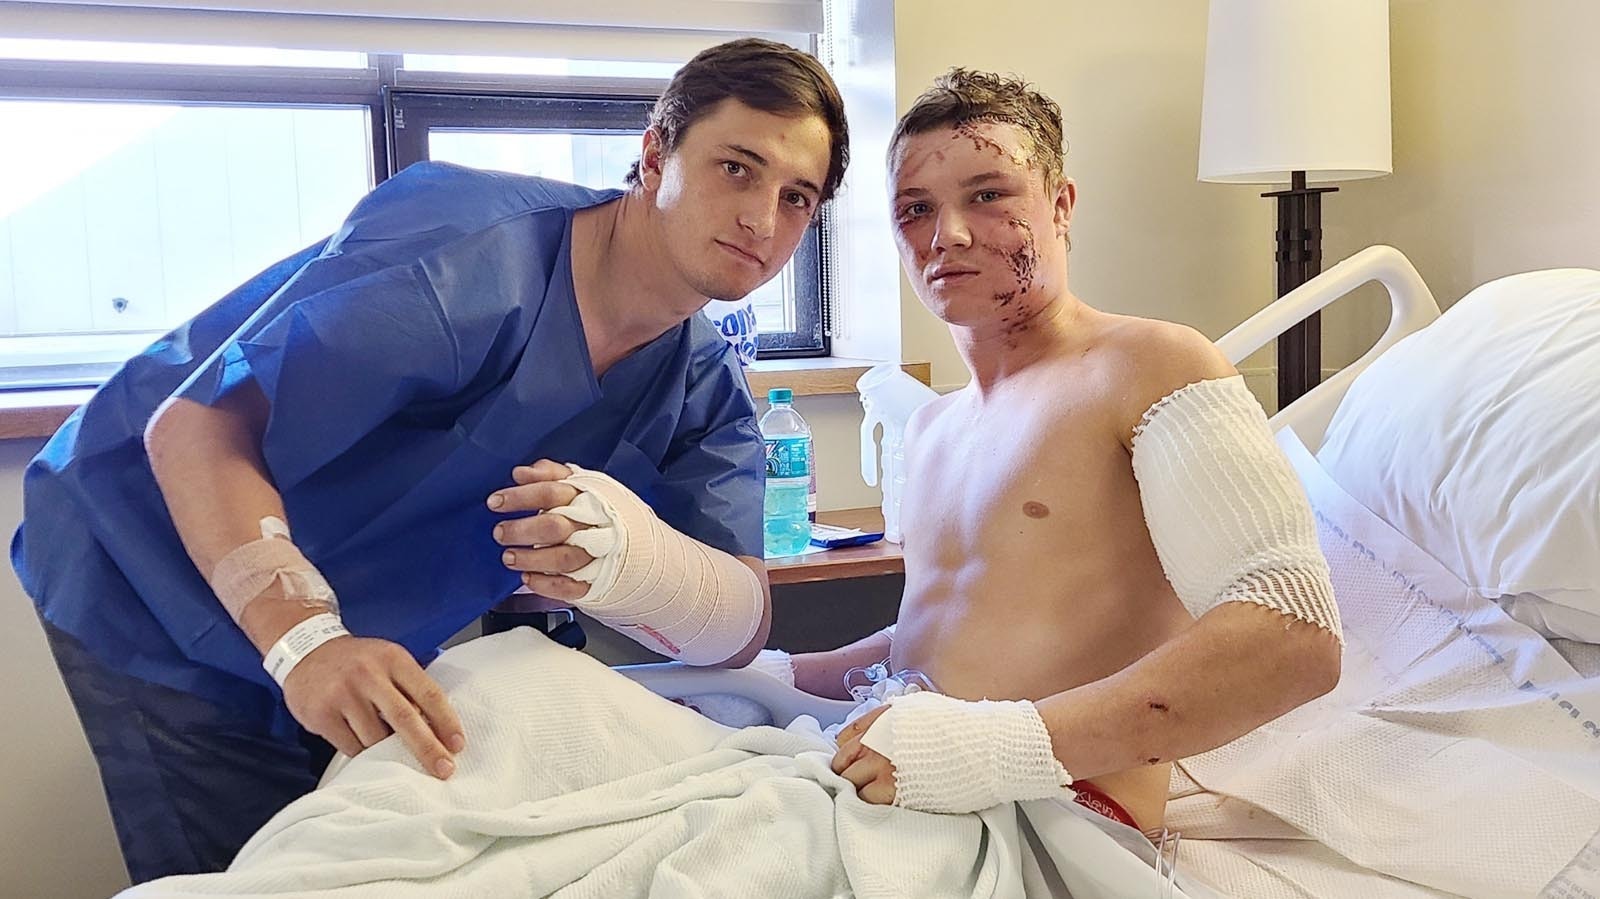 Brady Lowry, left, and Kendell Cummings after being mauled by a grizzly near Cody in October 2022. The bear was attacking Lowry when Cummings jumped on its back to save his friend.